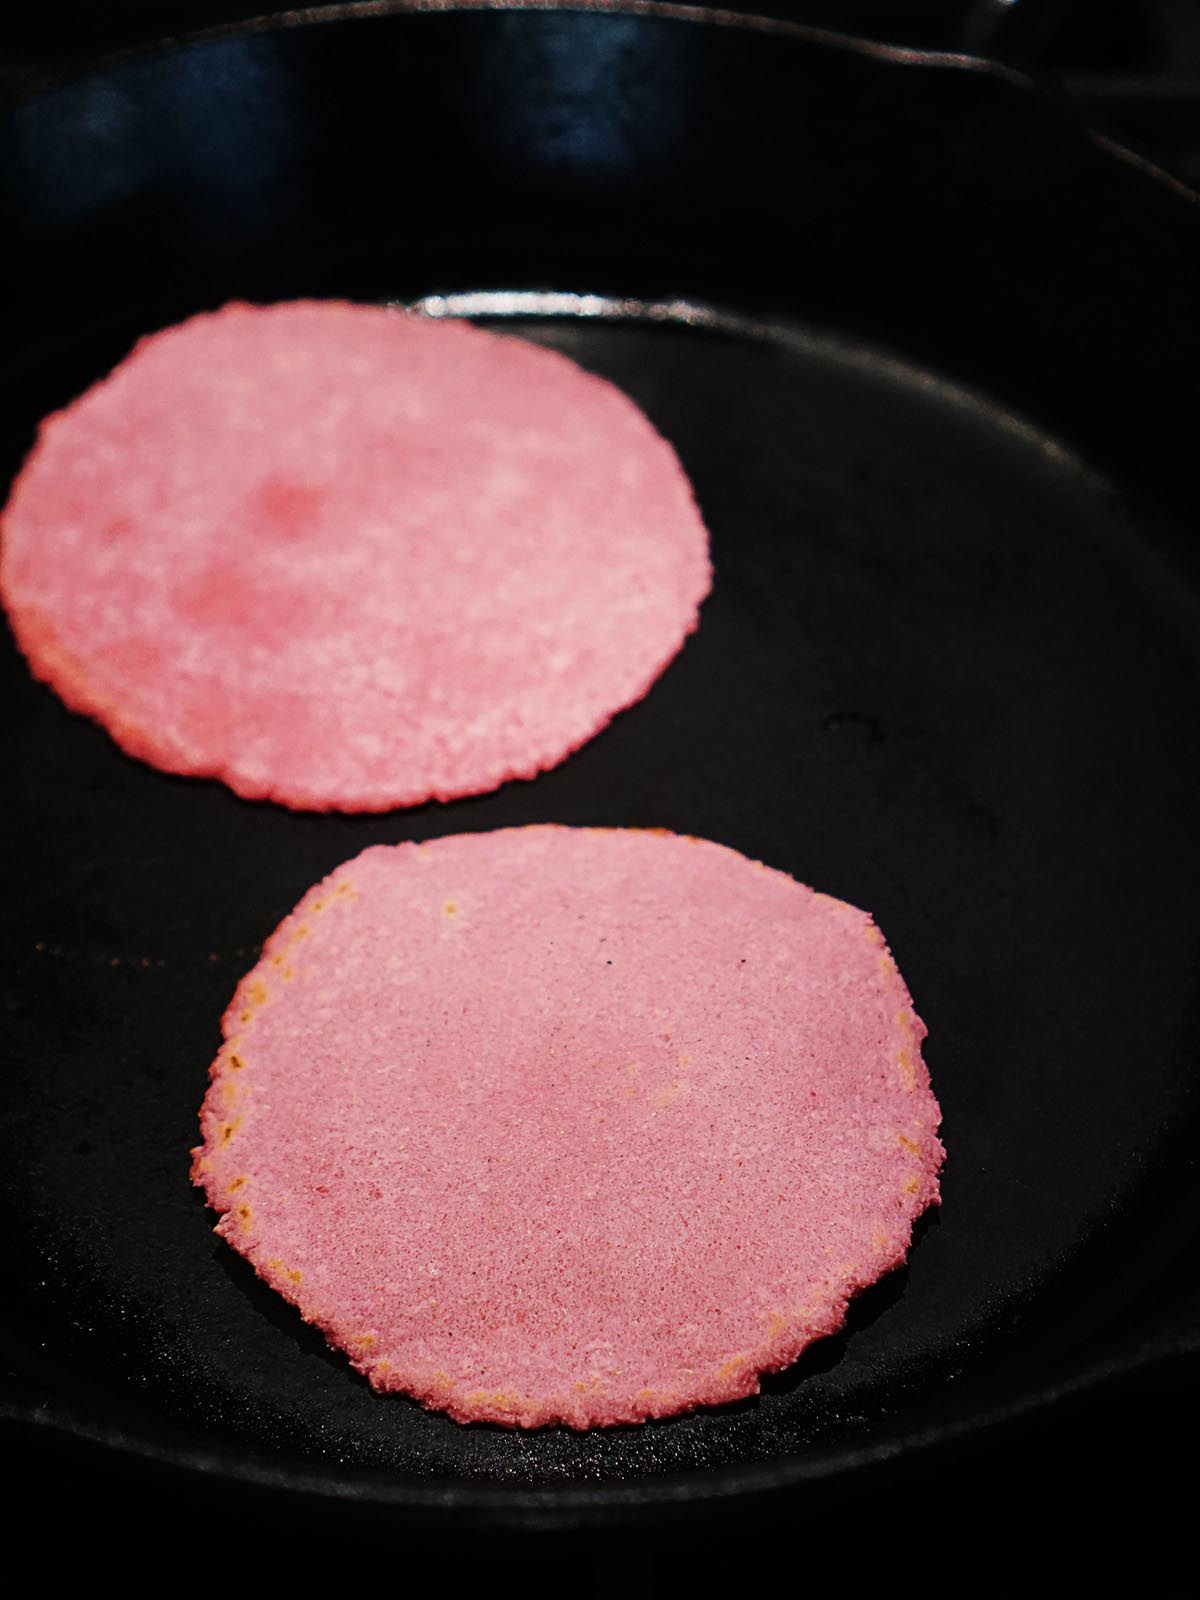 Cooking two pink tortillas on an iron skillet.